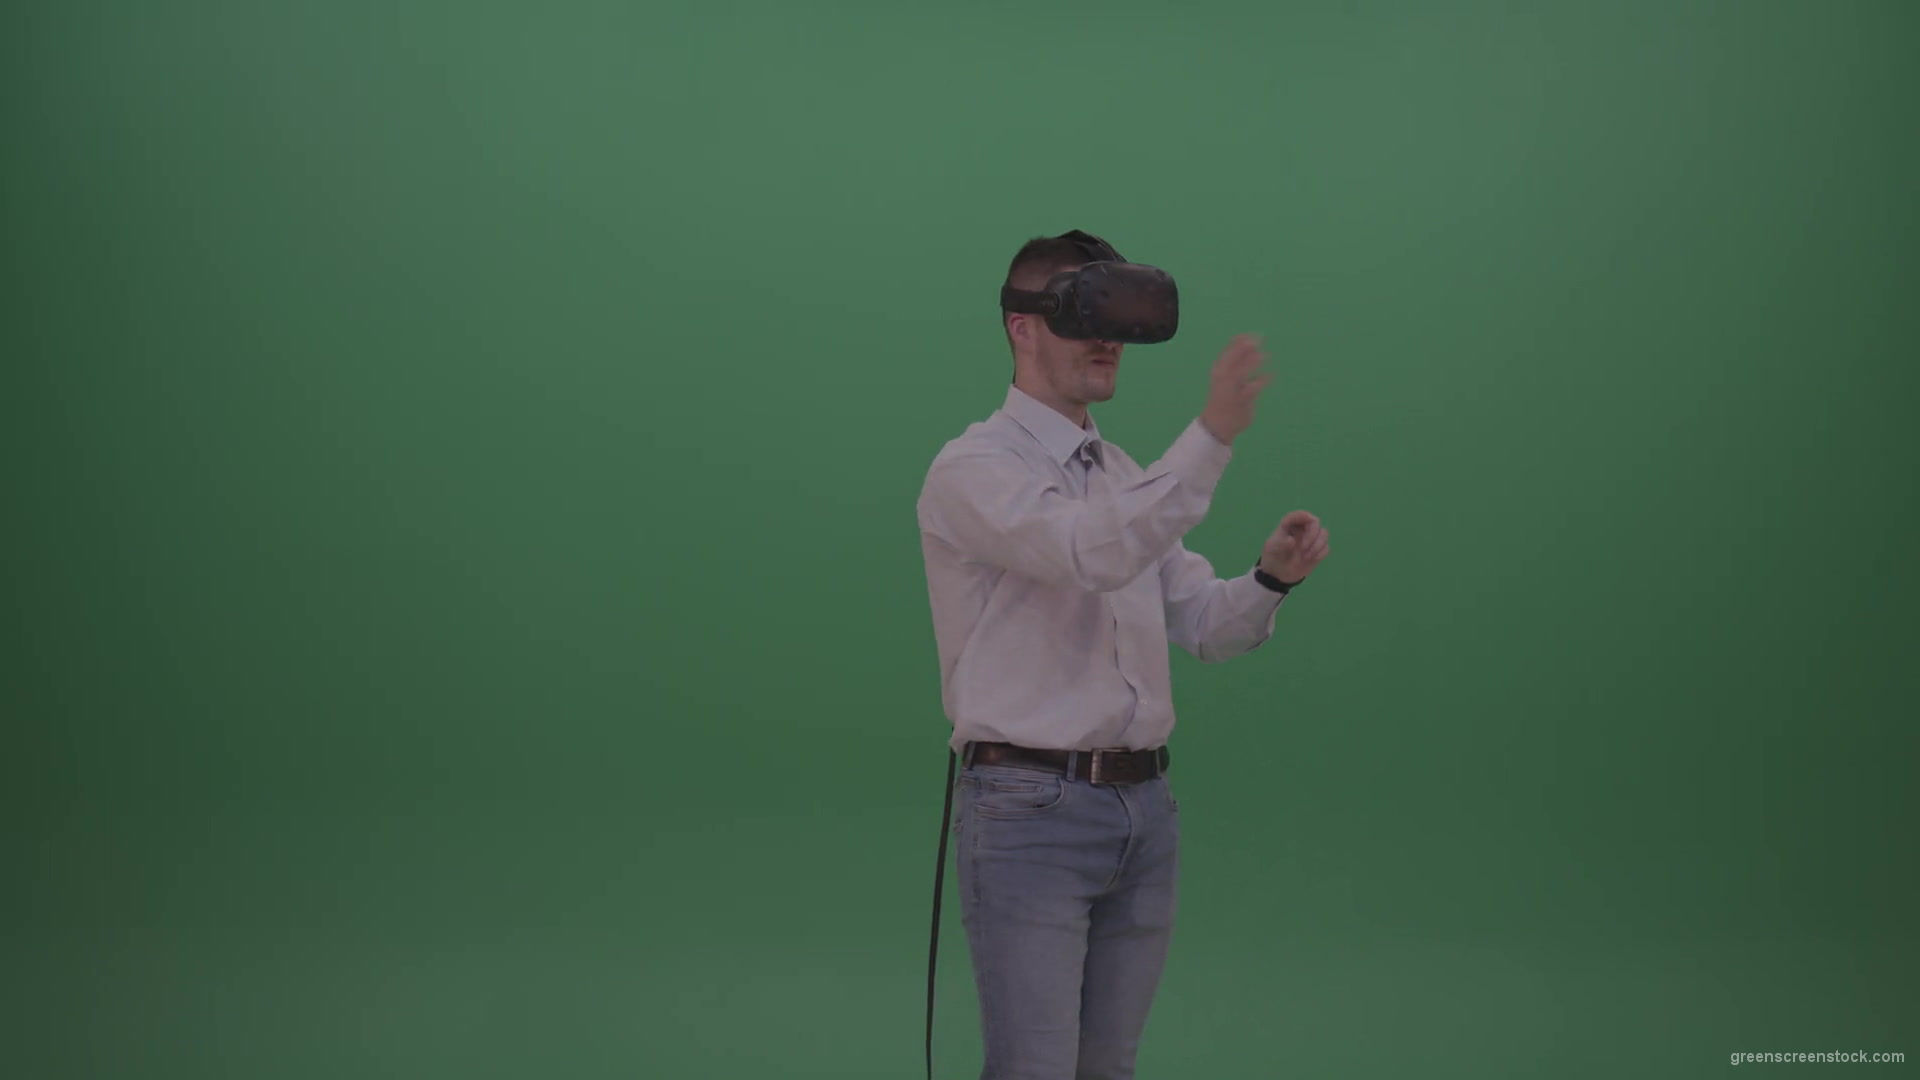 Young_Man_Wearing_White_Shirt_Making_Hard_Decision_Using_Virtual_Glasses_To_Solve_The_Task_Green_Screen_Wall_Chroma_Key_Background-1920_007 Green Screen Stock